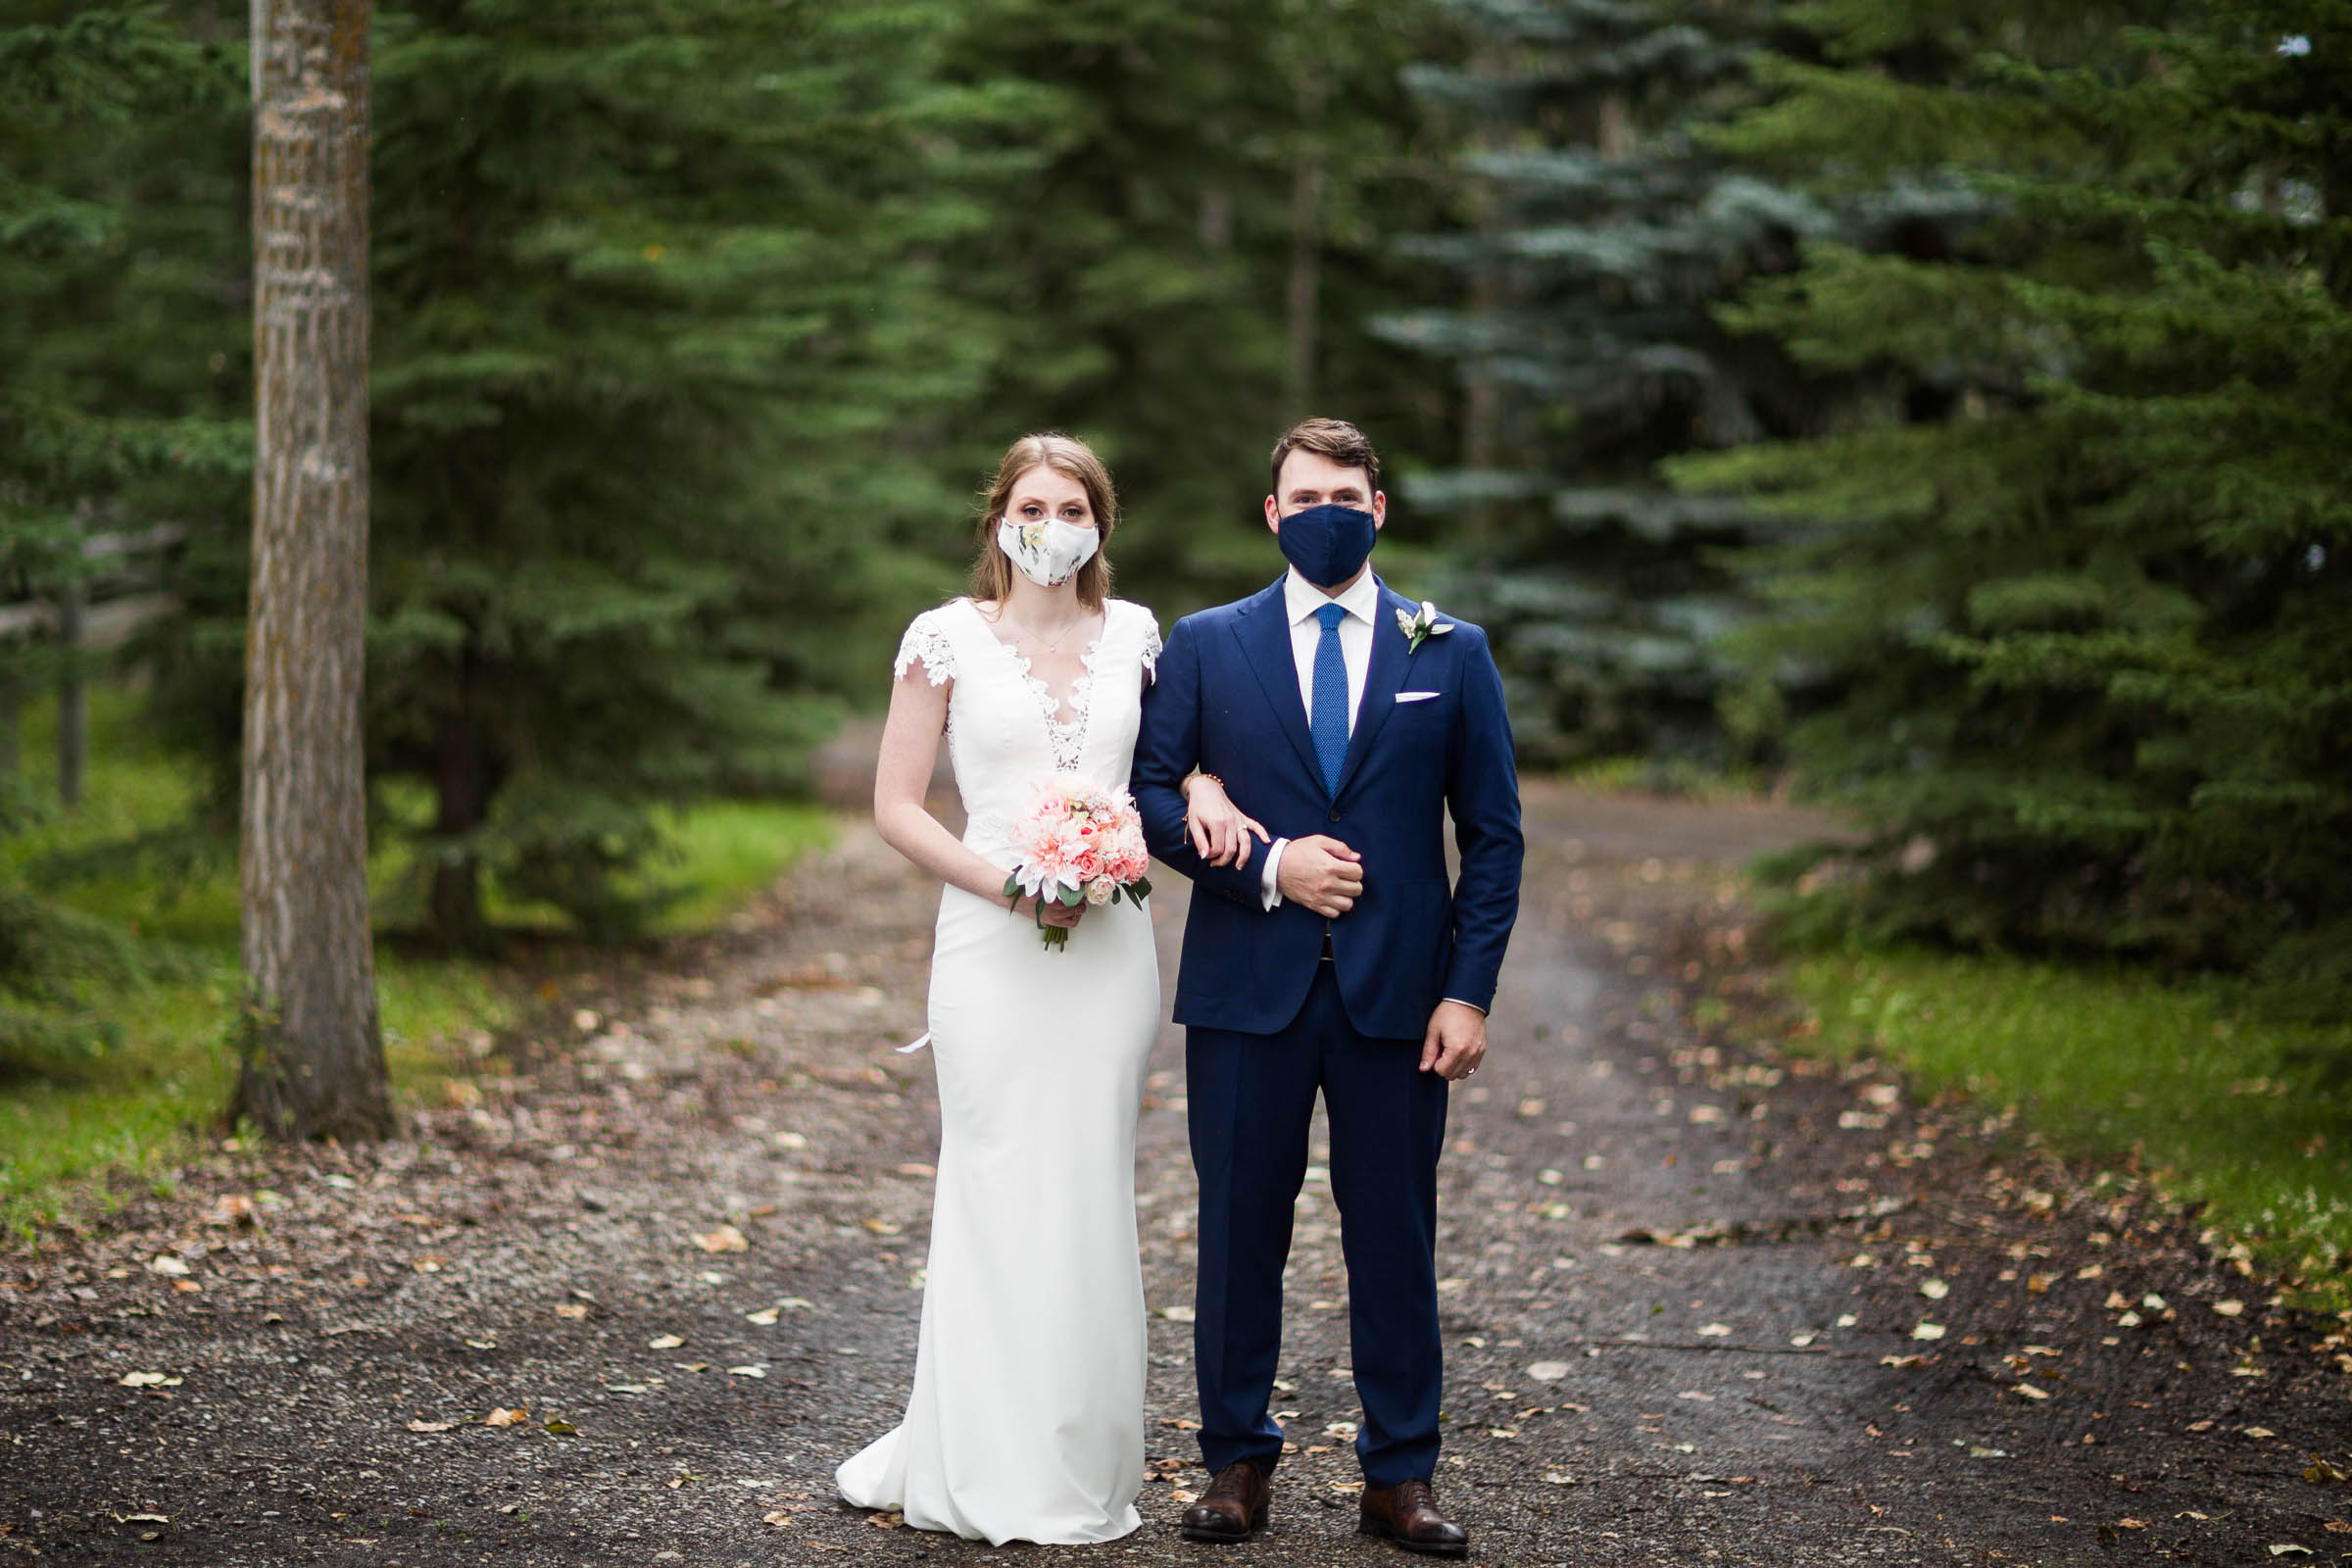 Couple wearing wedding masks in forest setting